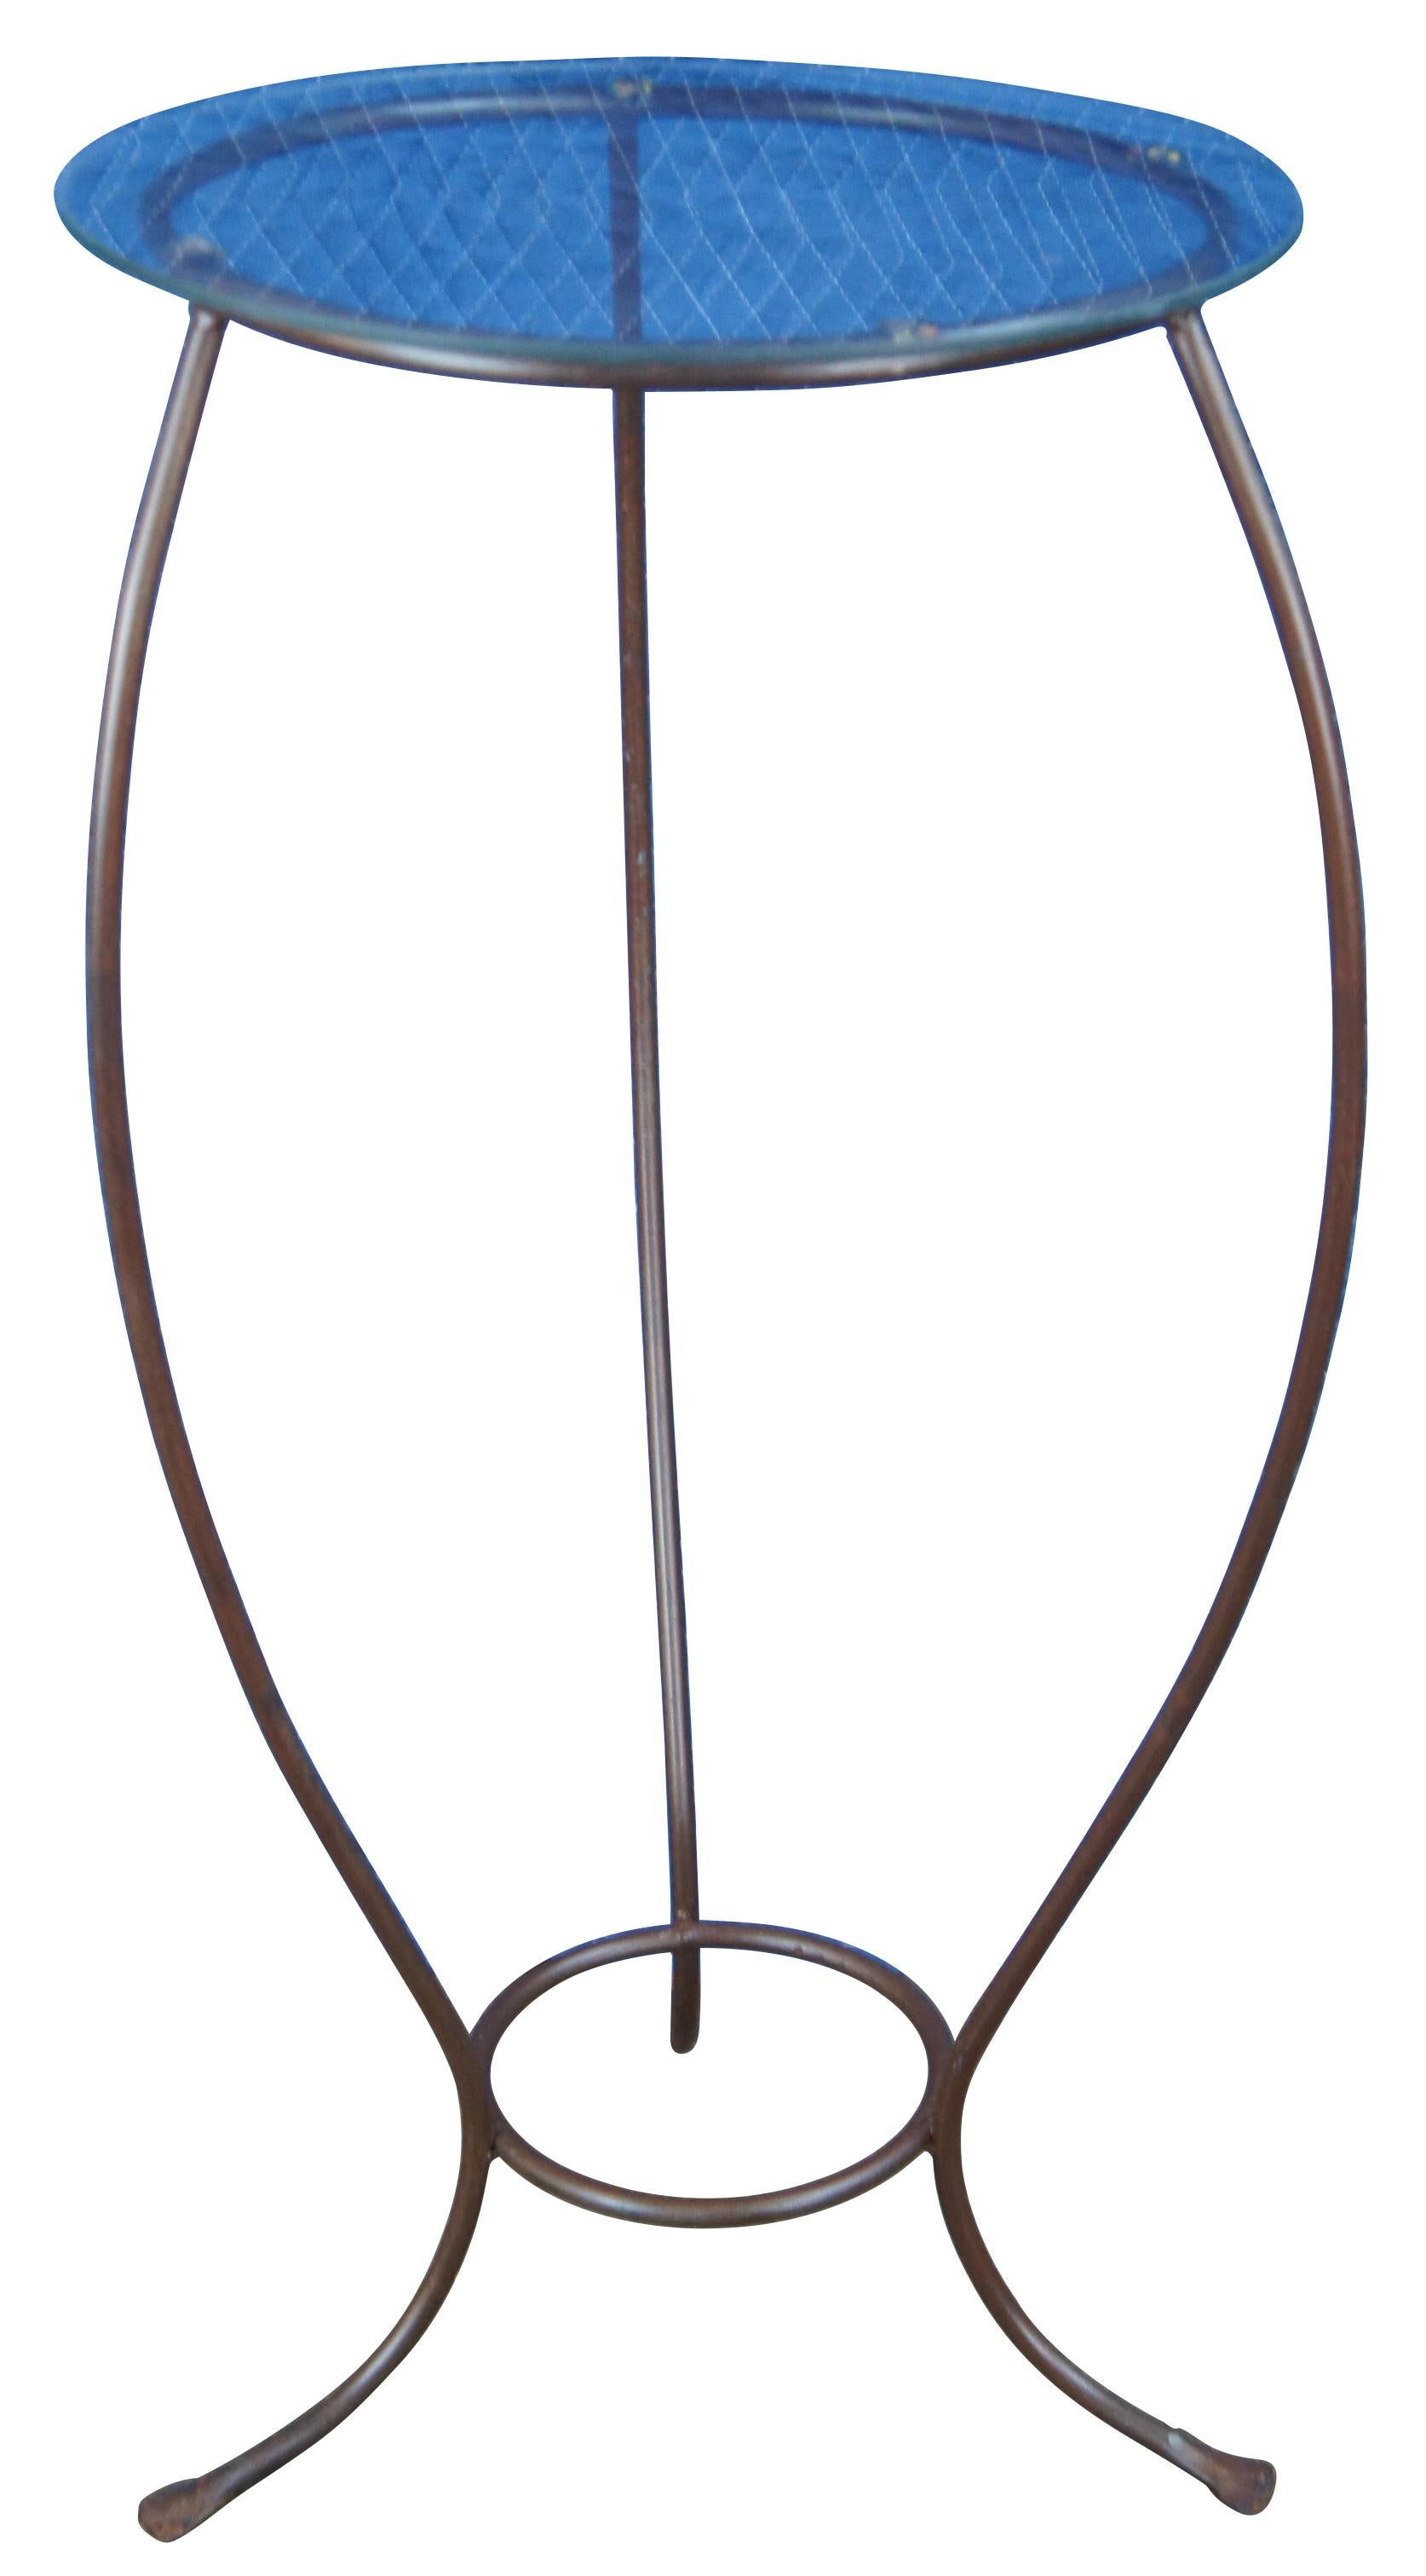 Vintage wrought iron plant stand featuring serpentine form with round glass top. Measure: 31